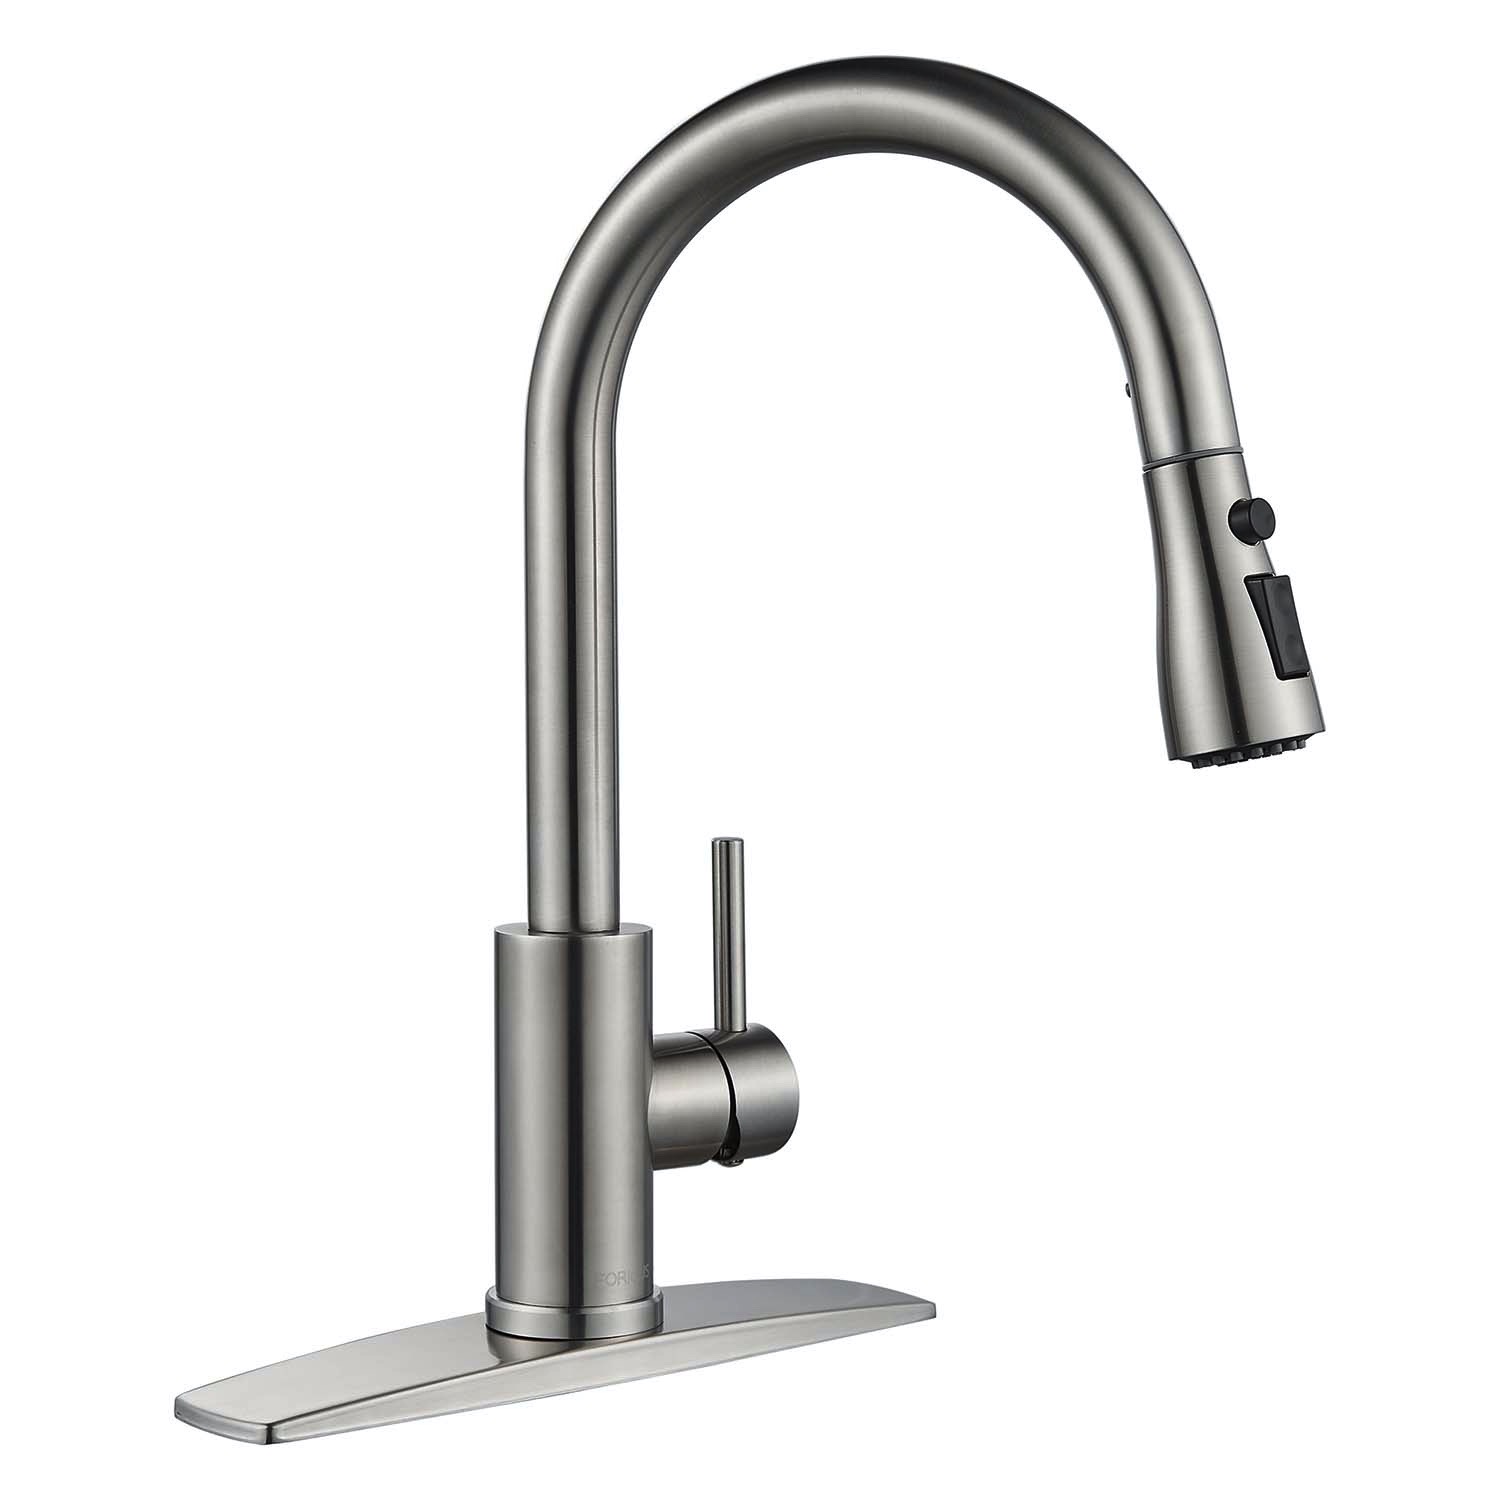 Forious Kitchen Faucet for Pull Down Sprayer Single Handle Sink Faucet Brushed Nickel in Kitchen - image 2 of 10